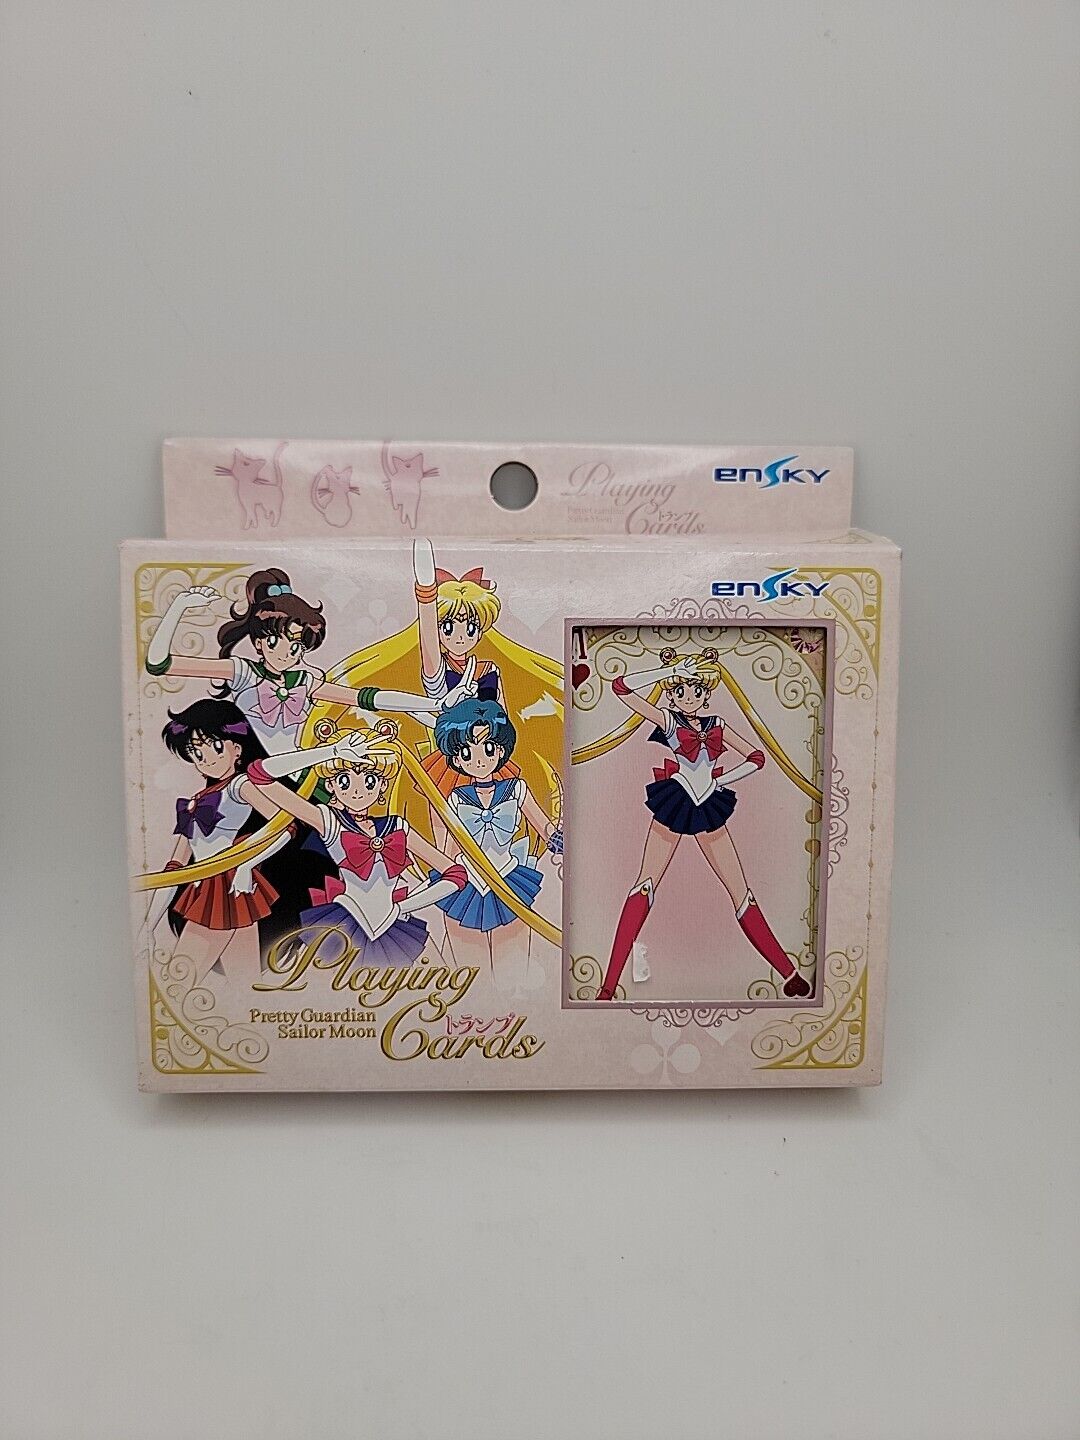 Rare Pretty Guardian Sailor Moon Playing Cards by Ensky Made In Japan NIB